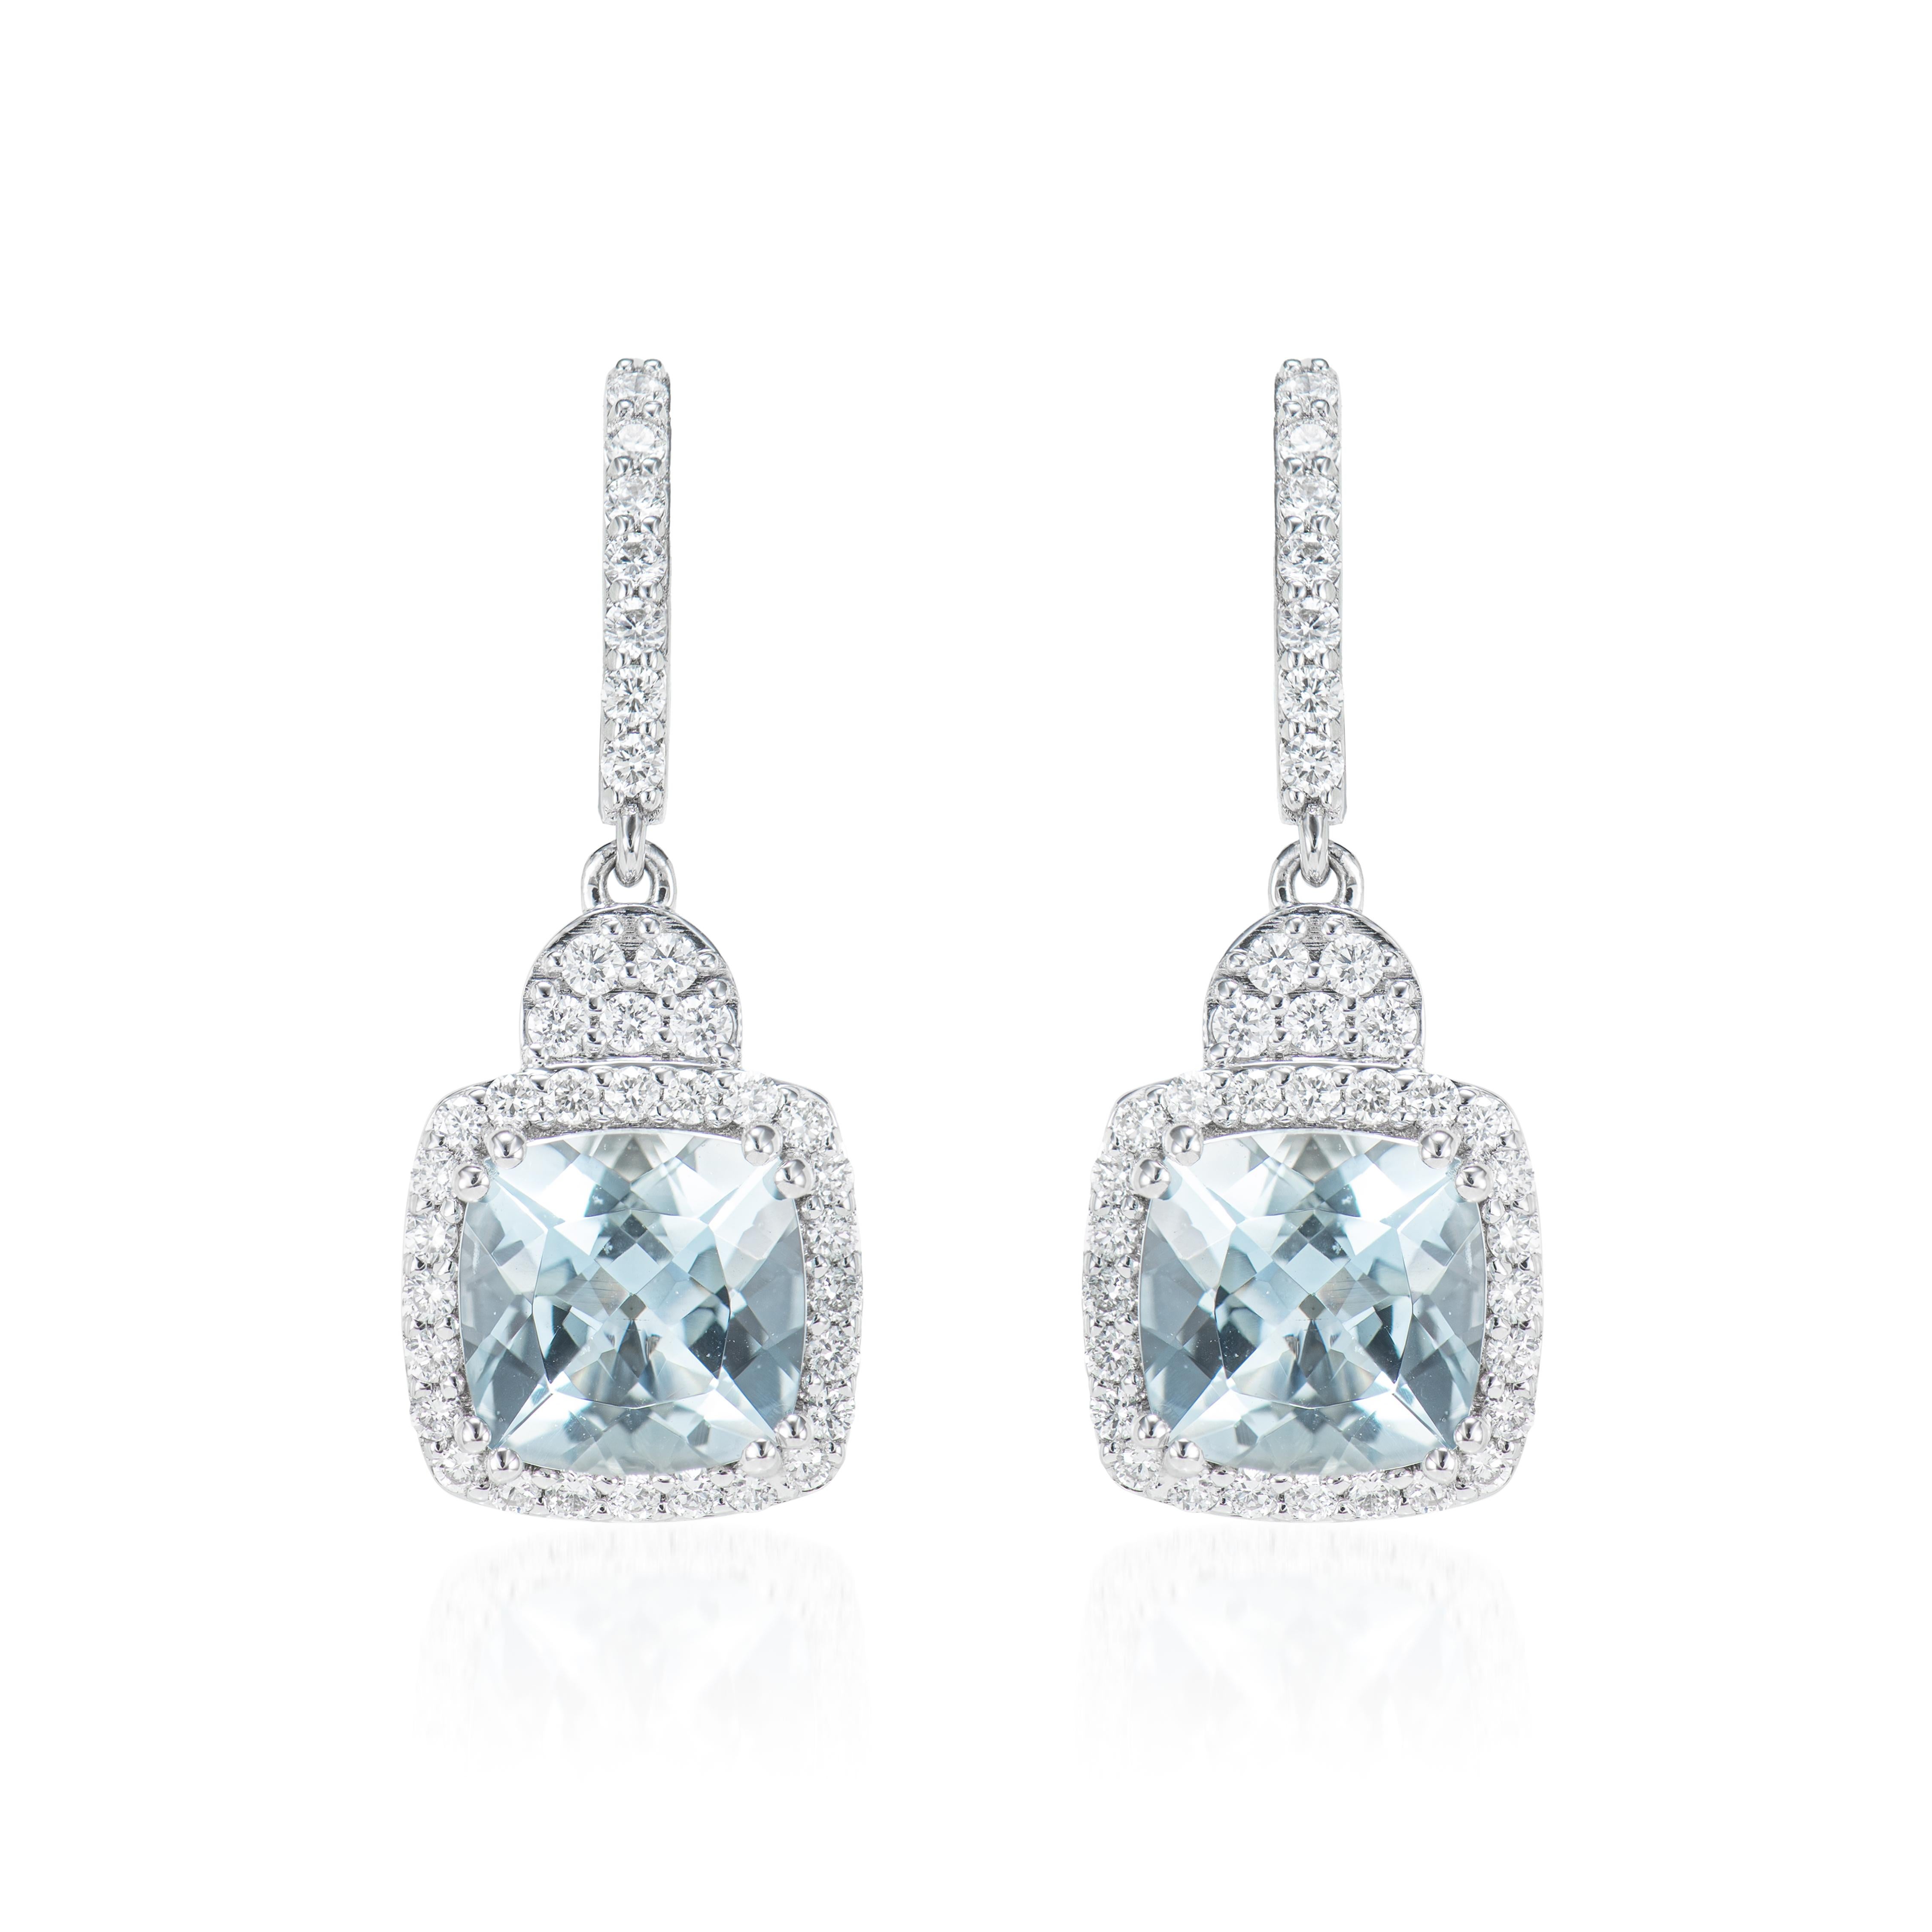 Contemporary 3.81 Carat Aquamarine Drop Earrings in 18 Karat White Gold with Diamond. For Sale